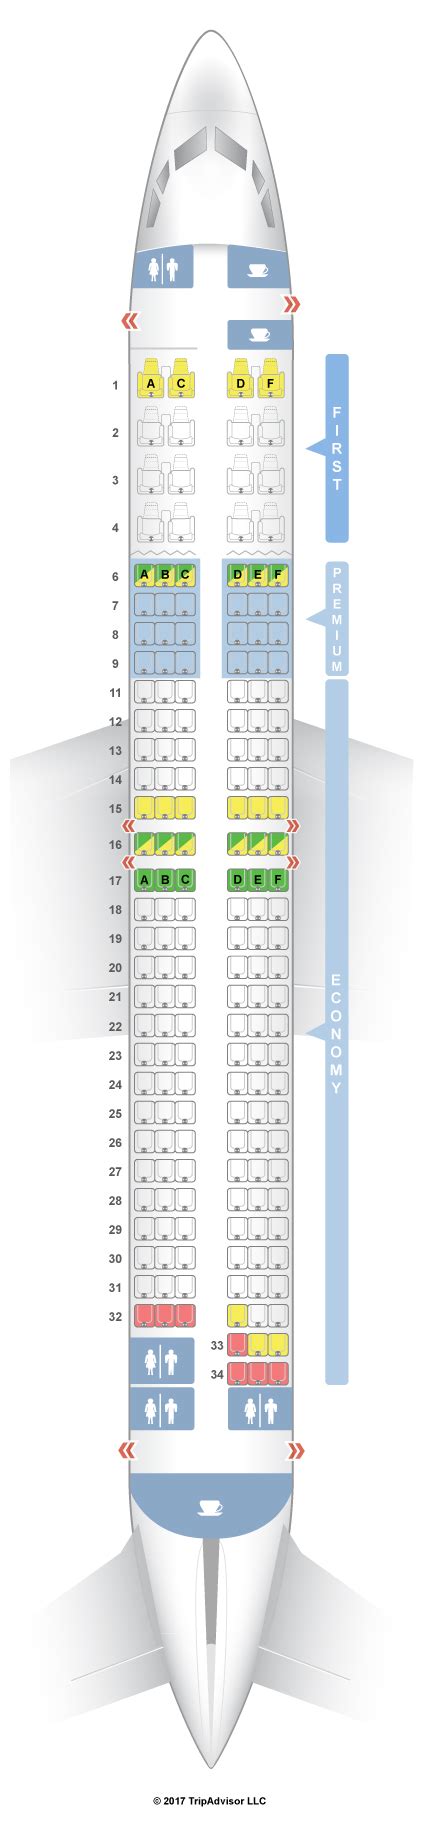 For your next Alaska Airlines flight, use this seating chart to get the most comfortable seats, legroom, ... Boeing 737-700 (737) Boeing 737-800 (738) Boeing 737-900 (739) Bombardier Q400; Embraer 175 (E75) ... SeatGuru was created to help travelers choose the best seats and in-flight amenities. Forum; Mobile; FAQ;